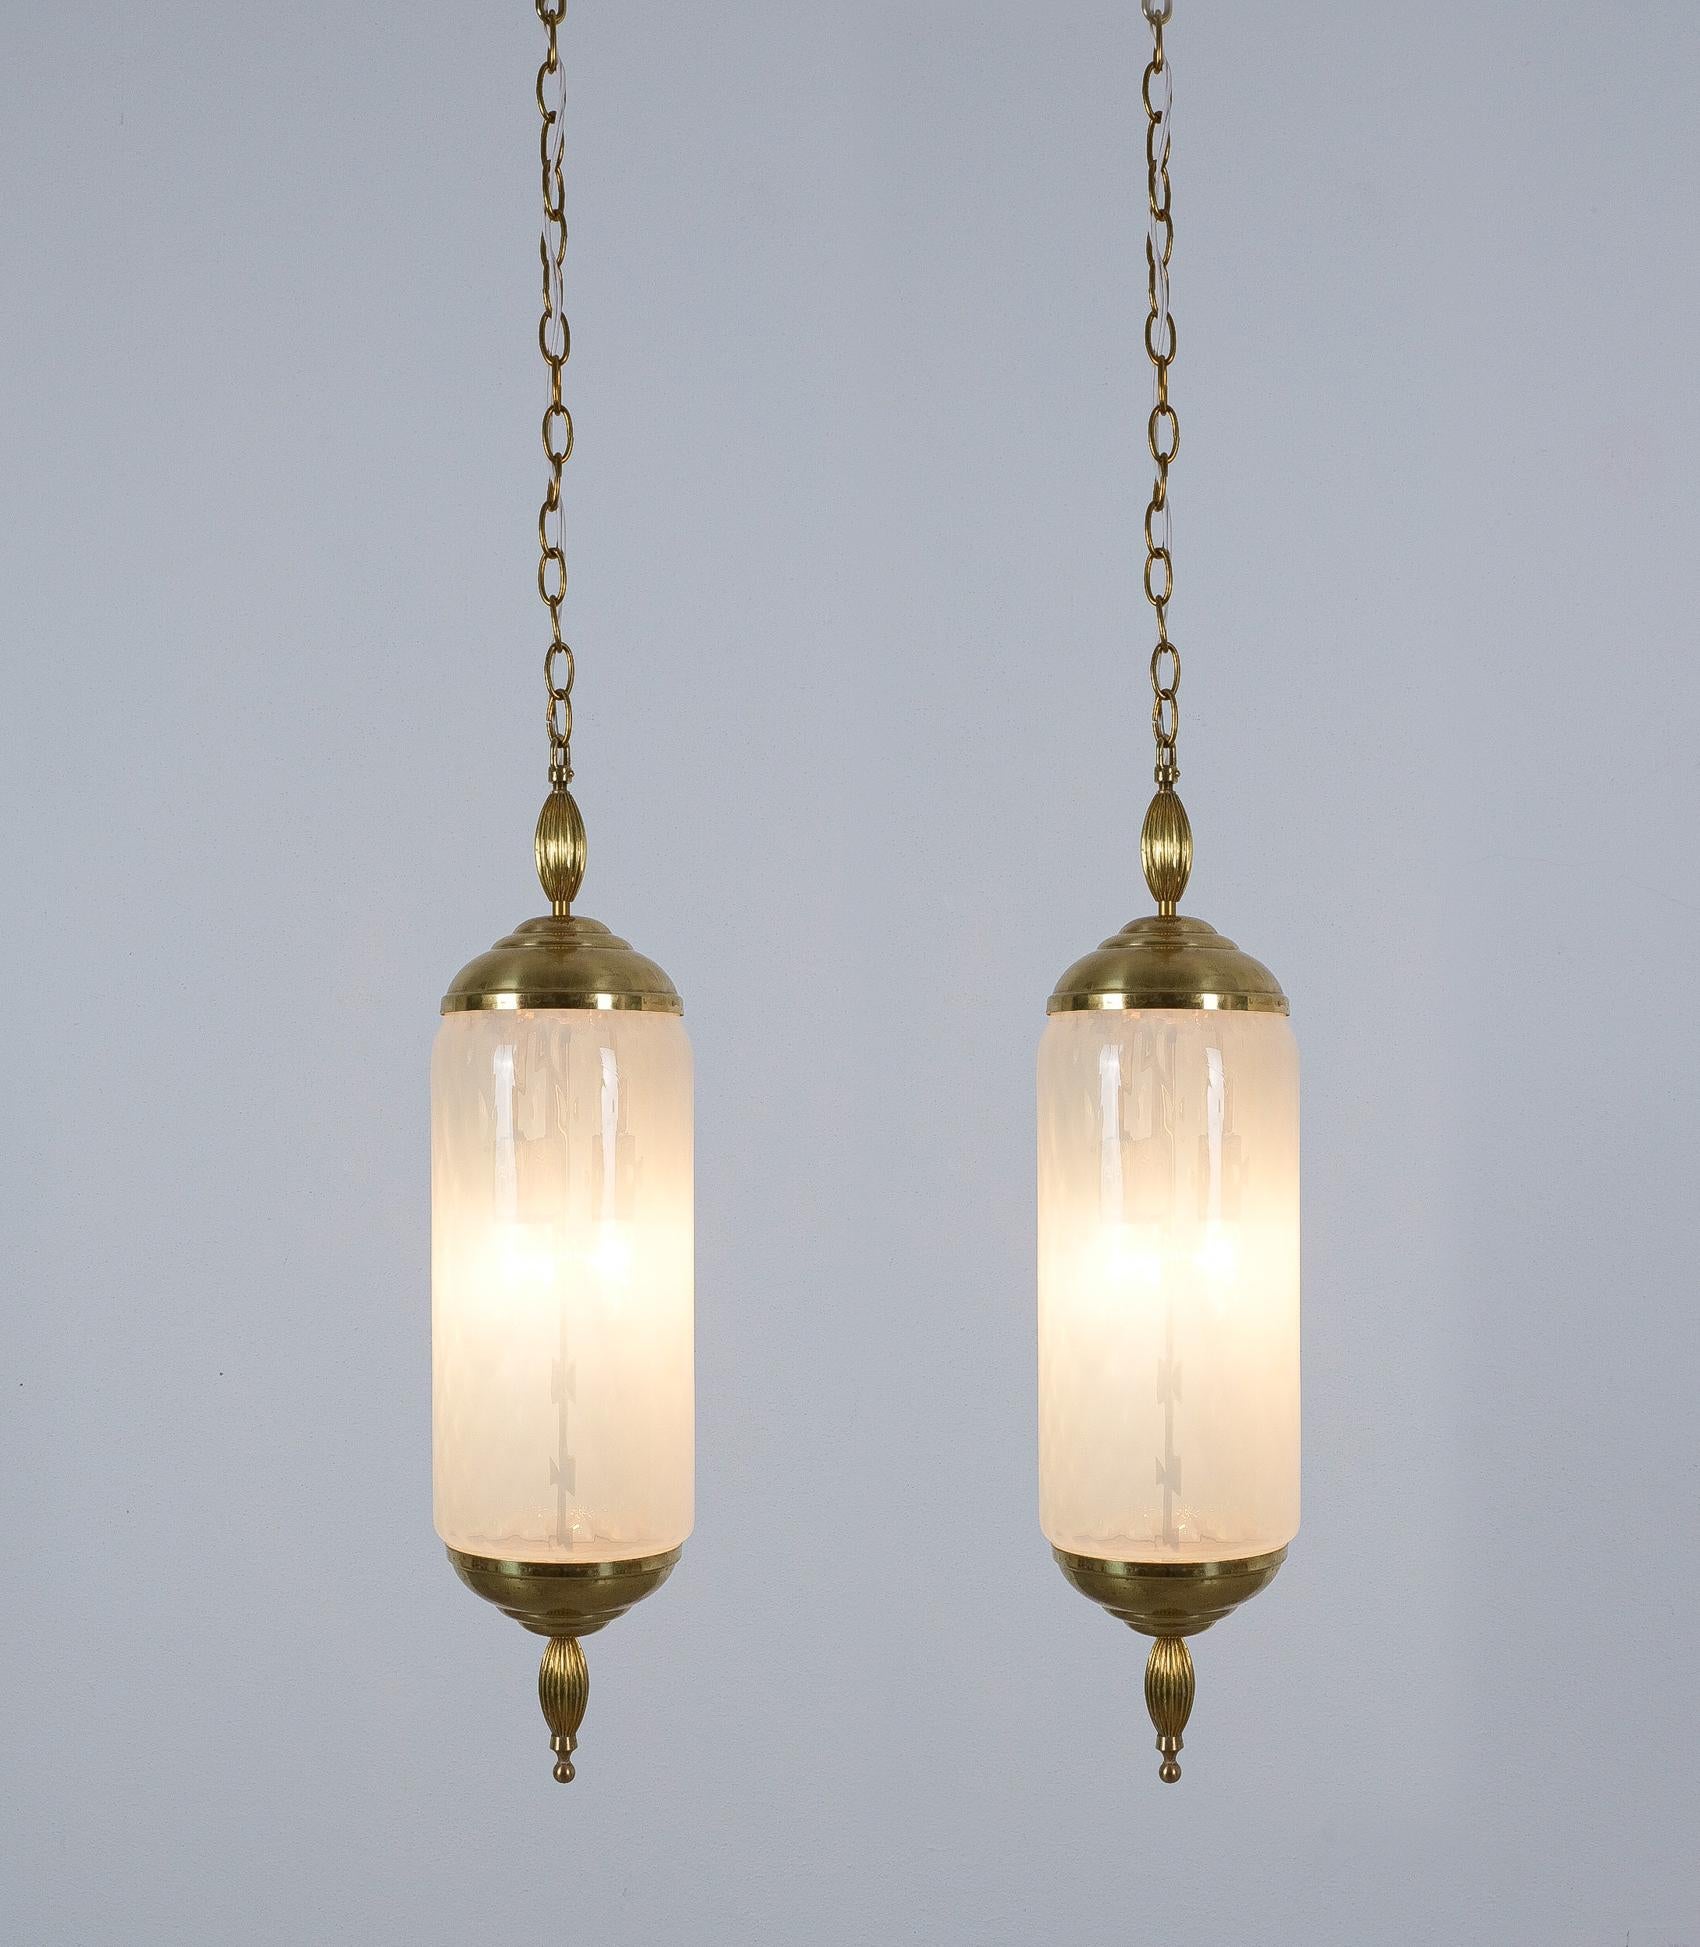 Murano Glass Pendant Lamps Pair Lantern Iridescent Blue Glass Lights, circa 1960, Italy- priced as a pair- 6.7